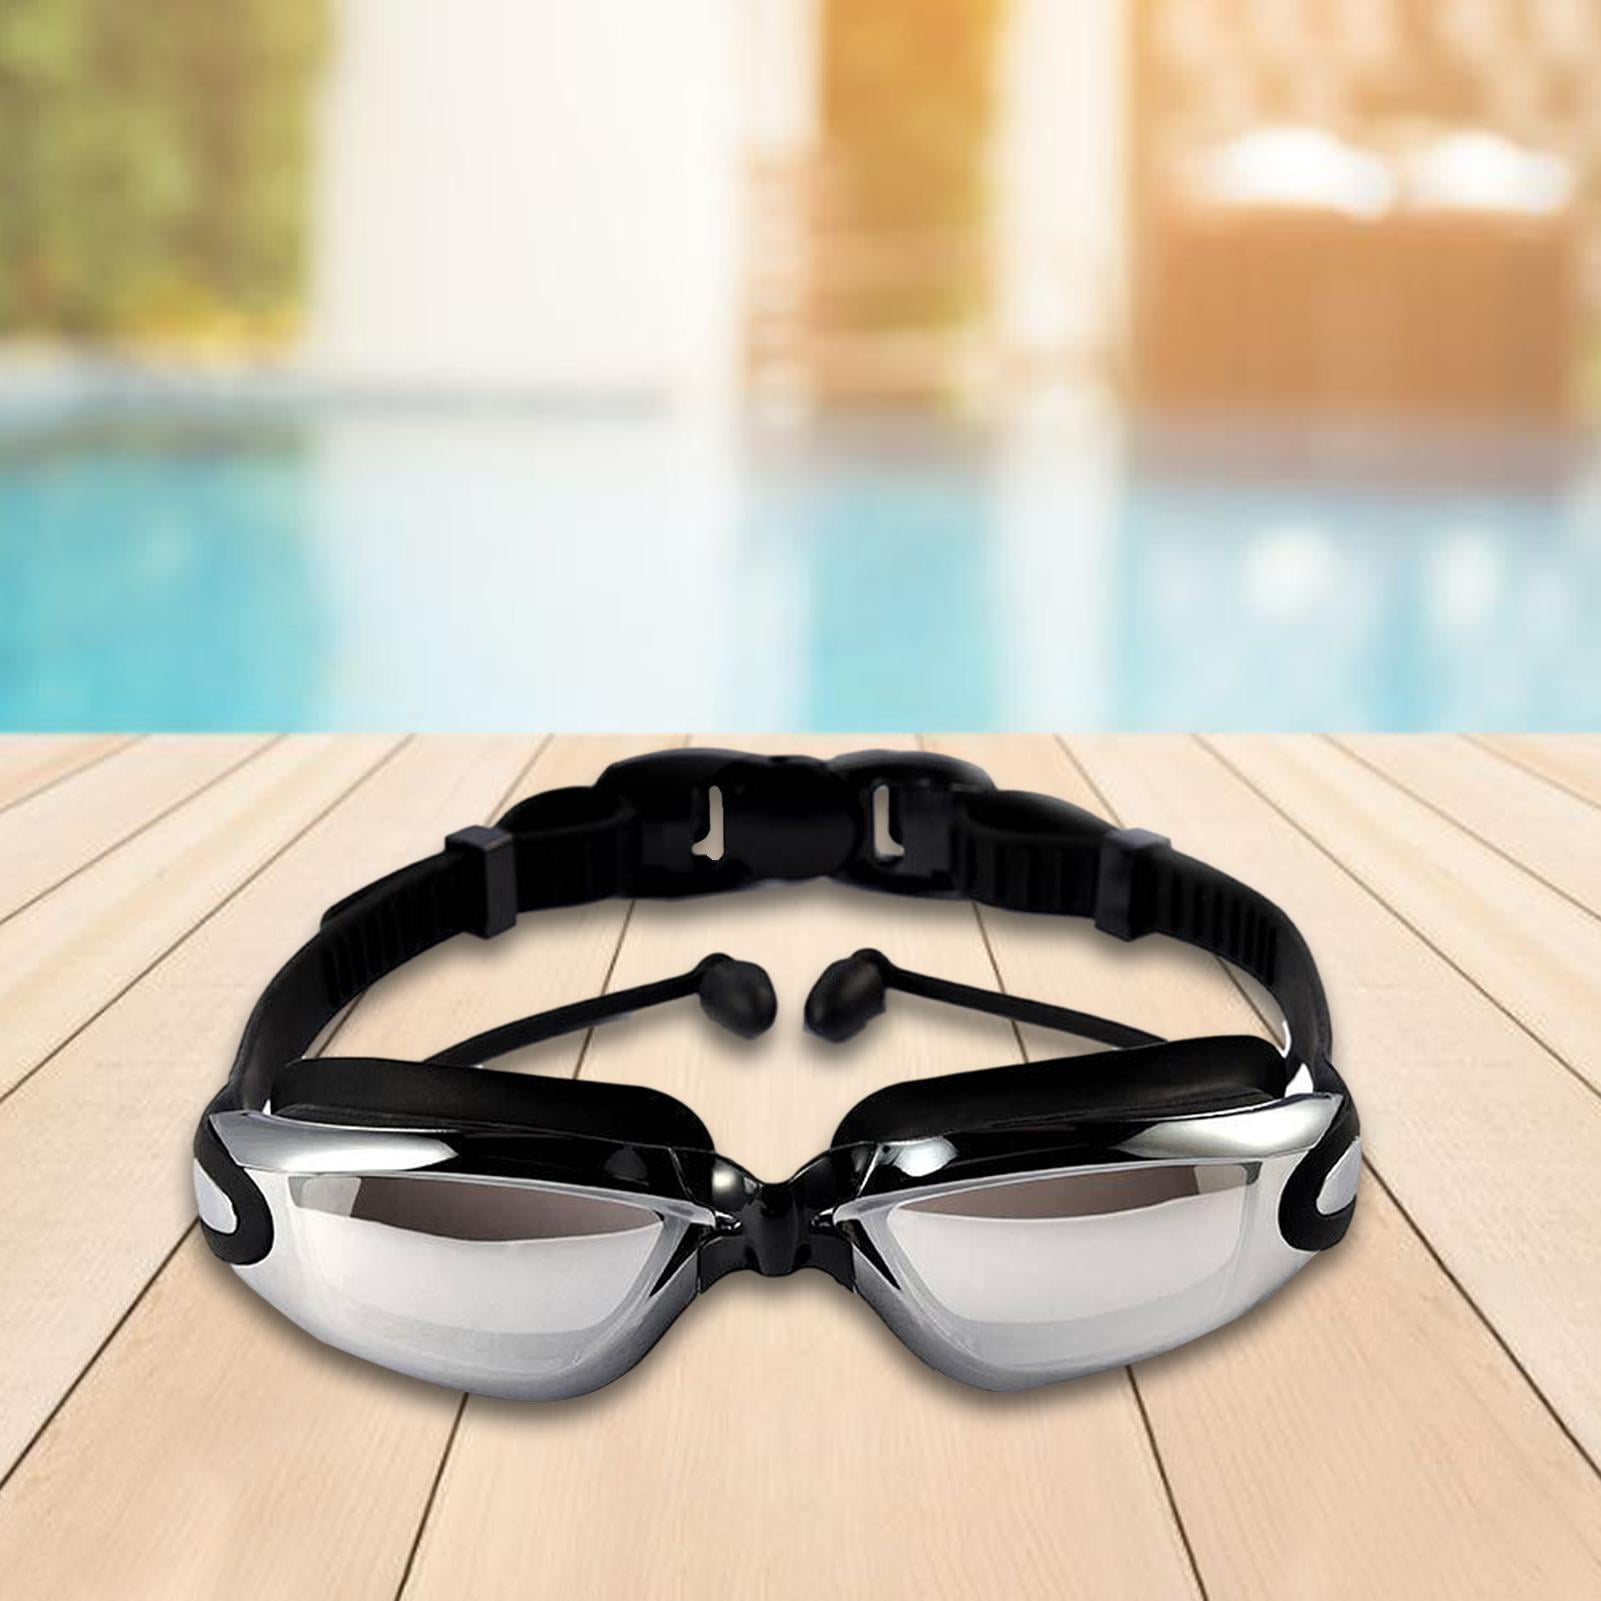 Latex Free ages 6-14  various colors Antifog Details about   SPEEDO  Swim Goggles 